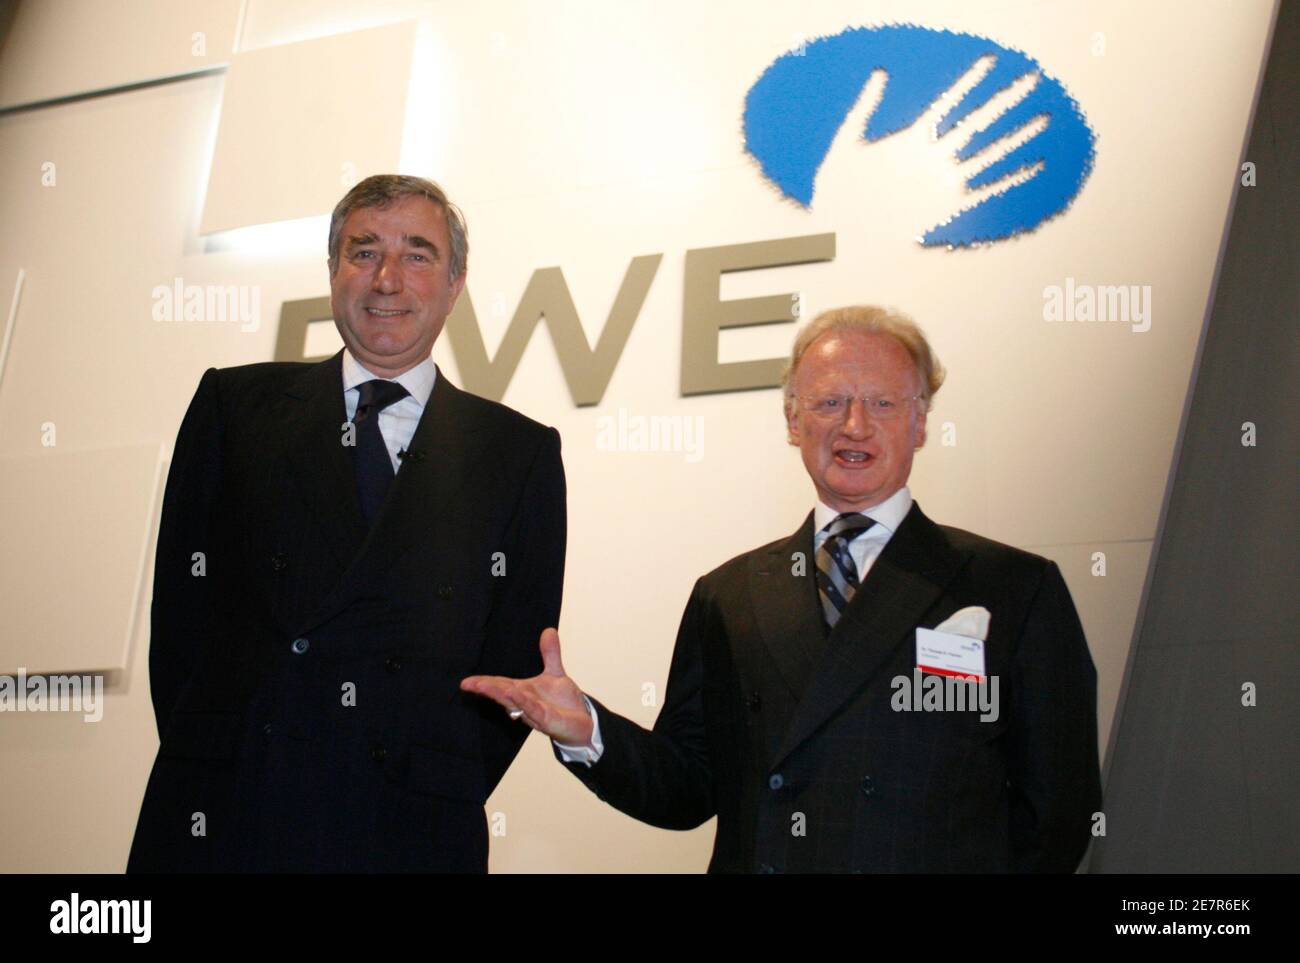 Thomas R. Fischer (R), supervisory board of RWE gestures to Harry Roels, CEO of German multi-utility RWE during the general meeting in Essen April 18, 2007. REUTERS/Ina Fassbender     (GERMANY) Stock Photo